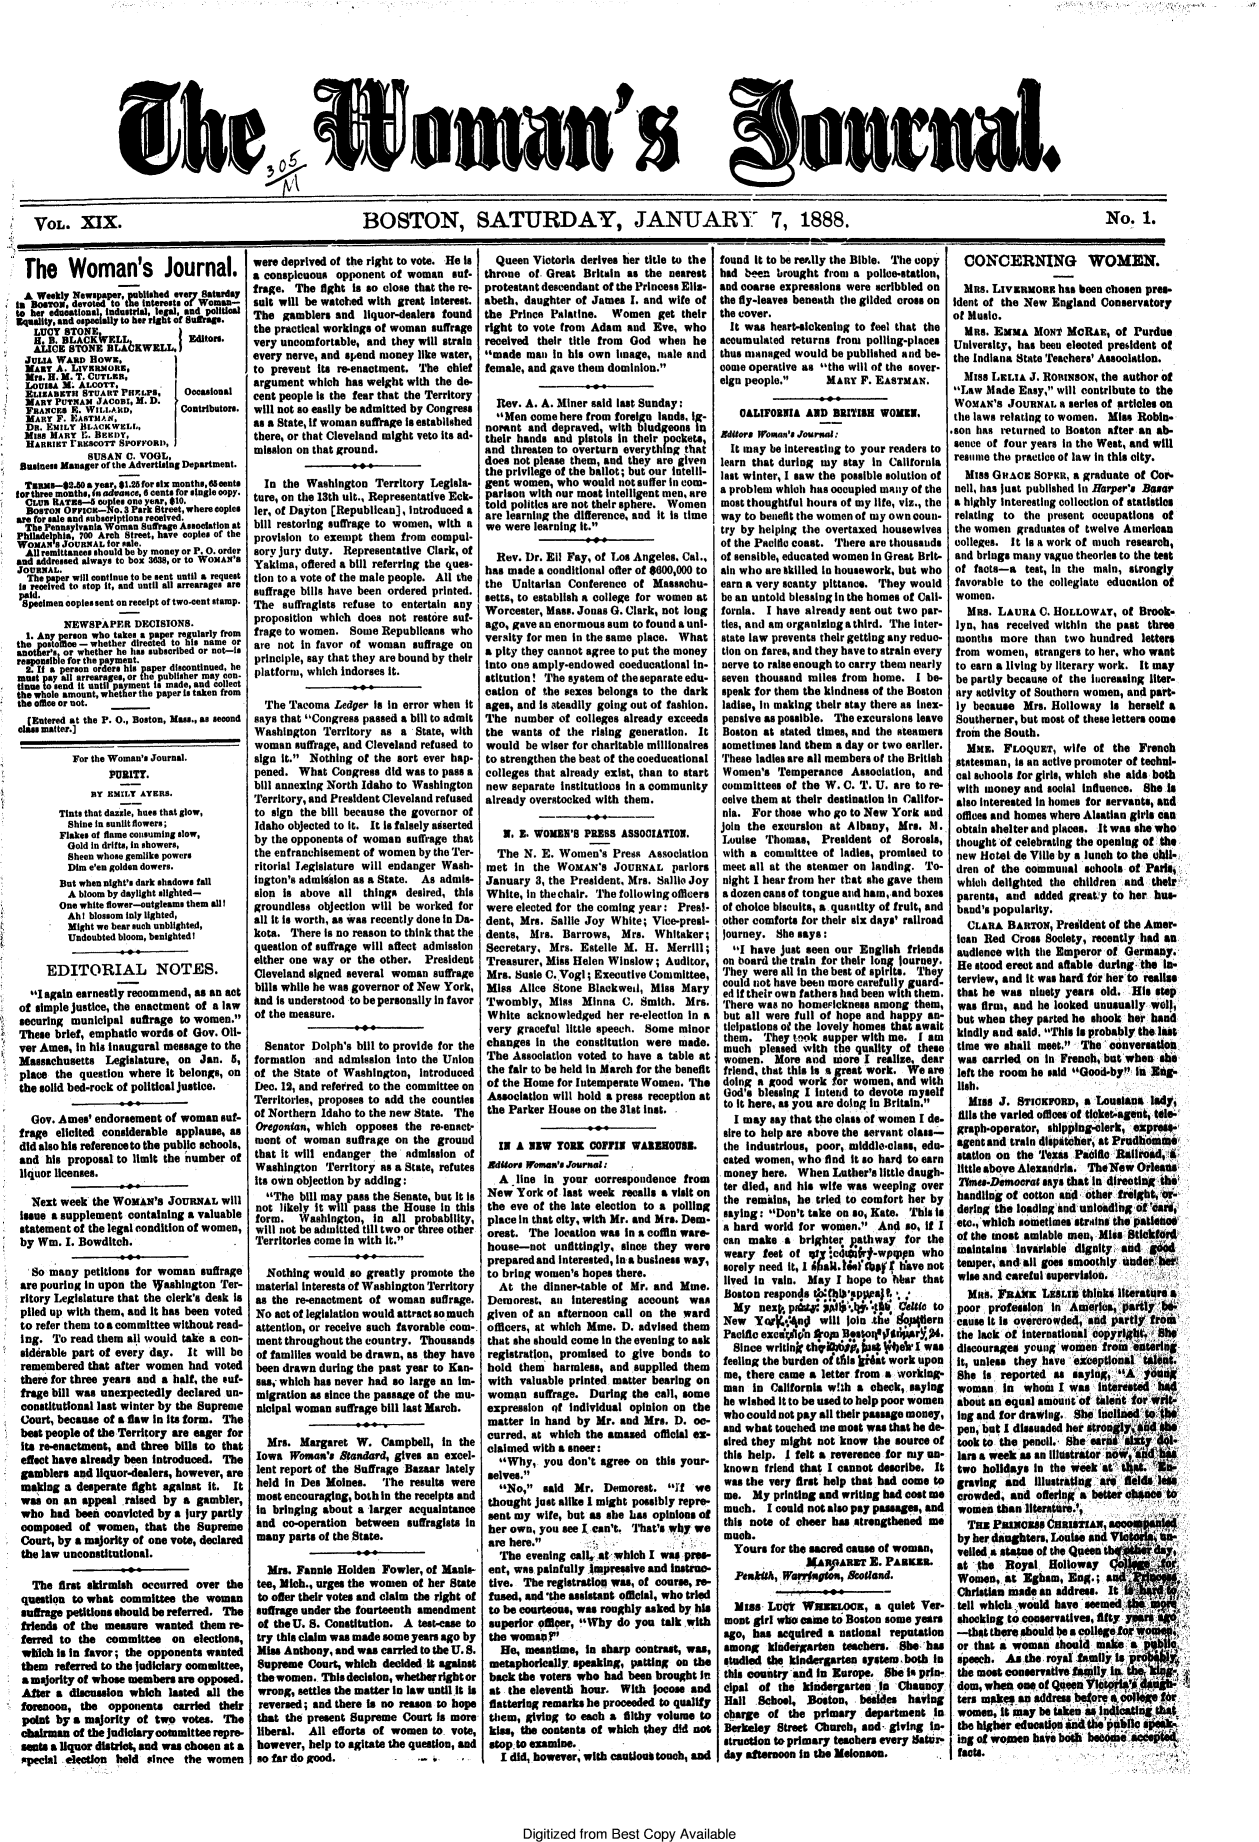 handle is hein.journals/wmjrnl19 and id is 1 raw text is: 










8Woan 5's


1 VOL. XIX.


onual. _


BOSTON, SATURDAY, JANUARY 7, 1888.


No. 1.


  The Woman's Journal.
  A Weekly Newsppr    abtdever    atardaY
t.  etIndustrial, legal. md political
Equality, and ospedlaily to he ret of Wosa-
   LUCY  STONE
   H. B. BLACK  ELL           Editor.
   ALICE STONE    bLA6KWELL. I
   JuA WARP  flown.
   MANY A. LIvmnaona,
   Mrs. H. M. T. CUTLER.
   LousAs M. ALCOTT.
   ELIZAET  STUART PaoPrs,    Occasional
   MANY PUTxAN JACOaI, M. D.
   FRANCES E. WILLARD,       Contributors.
   MARY F. EASTMA.K
   DR. EMILY BLACKWELL,
 Miss MARY  I. BEEDY,
 HARRIET  rRESCOTT SPOFFORD,
             SUSAN 0. VOGL,
 Business Manager of the Advertising Department.
 TanMs-*2.80a year, $1.25 for six months, 6oeents
for three months, 7. advance, 6 cents for single copy.
  CLUB RATE-   copies one year, $10.
  BosTON Orriaoa-No. 8 Park Street, where copies
are for sale and subscriptions received.
  The Pennsylvania Woman Suffrage Association at
Philadelphia, 700 Arch Street, have copies of the
WOMAN  a JOURNAL for sale.
  Alt remittances should be by money or P. 0. order
and addressed always to box 308, or to WoMAN'S
JOURNAL.
  The paper will continue to be sent until a request
  Is reoeived to stop it, and until all arrearages are
  paid.
  Specimen copies sent on receipt of two-cent stamp.
        NEWSPAPER DECISIONS.
  1. Any person who takes a paper regularly from
the postoIlce - whether directed to his name or
another's or whether he has subscribed or not-ts
responsible for the payment.
  2. If a person orders his paper discontinued, he
must pay all arrearages, or the publisher may con-
tineto send it until pament is made, and collect
the whole amount, whether the paper is taken from
the oflee or not.
  (Entered at the P. 0., Boston, Mass., as second
class matter.]


         For the Woman's Journal.
                PURITY.
             BY EMILY ATERS.
       Tints that dazile, hues that glow,
         Shine In sunlit flowers;
       Flakes of flame consuming slow,
         Gold in drift., in showers,
         Sheen whose gemlike powers
         Dim e'en golden dowers.
       But when night's dark shadows fall
         A bloom by daylight alighted-
       One white flower-outgleams them allI
         Ah I blossom inly lighted,
         Might we bear such unblighted,
         Undoubted bloom, benighted I

     EDITORIAL NOTES.
  I again earnestly recommend, as an act
of simple justice, the enactment of a law
securing municipal  suffrage to women.
These brief, emphatic words of Gov. 011-
ver Ames, in his inaugural message to the
Massachusetts  Legislature, on  Jan. 5,
place the  question where it belongs, on
the solid bed-rock of political justice.

  Gov. Ames' endorsement  of woman  sut-
frage  elicited considerable applause, as
did also his reference to the public schools,
and  his proposal to limit the number of
liquor licenses.

  Next week  the WOMAN'S  JoURNAL   will
issue a supplement containing a valuable
statement of the legal condition of women,
by Win. I. Bowditch.

  So many  petitions for woman  suffrage
are pouring in upon the iashington  Ter-
ritory Legislature that the clerk's desk Is
piled up with them, and It has been voted
to refer them to a committee without read-
Ing.  To read them all would take a con-
siddrable part of every day.  It will be
remembered  that after women  had  voted
there for three years and a half, the euf-
frage bill was unexpectedly declared un-
constitutional last winter by the Supreme
Court, because of a flaw in its form. The
best people of the Territory are eager for
its re-enactment, and three bills to that
elect have already been Introduced. The
gamblers  and liquor-dealers, however, are
making  a desperate fight against it. It
was  on an appeal  raised by a gambler,
who   had beei convicted by a jury partly
composed   of women,  that the Supreme
Court, by a majority of one vote, declared
the law unconstitutional.

  The  first skirmish occurred over  the
question to what  committee  the woman
suffrage petitions should be referred. The
friends of the measure  wanted  them re-
ferred to  the committee   on  elections,
which  is in favor; the opponents wanted
them  referred to the judiciary committee,
a majority of whose members are opposed.
After  a discussion which lasted all the
forenoon,  the  opponents  carried their
point  by a majority of two  votes. The
chairman  of the judiolary committee repre-
seants a lquor district, and was chosen at a
special election held  since the women


I


were deprived of the right to vote. He is
a conspicuous  opponent of woman  suf-
frage. The fight Is so close that the re-
sult will be watched with great Interest.
The  gamblers  and  liquor-dealers found
the practical workings of woman suffrage
very uncomfortable, and they will strain
every nerve, and spend money like water,
to prevent Its re-enactment. The  chief
argument  which has weight with the de-
cent people is the fear that the Territory
will not so easily be admitted by Congress
as a State, if woman suffrage Islestablished
there, or that Cleveland might veto its ad-
mission on that ground.

  In the Washington   Territory Legisla-
ture, on the 13th ult., Representative Eck-
ler, of Dayton [Republican], ntroduced a
bill restoring suffrage to women, with a
provision to exempt them  from compul-
sory jury duty. Representative Clark, of
Yakima,  offered a bill referring the ques-
tion to a vote of the male people. All the
suffrage bills have been ordered printed.
The  suffragists refuse to entertain any
proposition which  does not restore suf-
frage to women.  Some  Republicans who
are not In favor of woman   suffrage on
principle, say that they are bound by their
platform, which indorses it.

  The Tacoma  Ledger is in error when it
says that Congress passed a bill to admit
Washington  Territory  as a  State, with
woman  suffrage, and Cleveland refused to
sign it. Nothing of the sort ever hap-
pened.  What  Congress did was to pass a
bill annexing North Idaho to Washington
Territory, and President Cleveland refused
to sign the bill because the governor of
Idaho objected to it. It Is falsely asiserted
by the opponents of woman  suffrage that
the enfranchisement of women by the Ter-
ritorial Leglelature will endanger Wash-
ington's admisslon as a State. As admis-
elon is above  all things  desired, this
groundless objection will be worked for
all it Is worth, as was recently done in Da-
kota.  There is no reason to think that the
question of suffrage will affect admission
either one way or the other.  President
Cleveland signed several woman suffrage
bills while he was governor of New York,
had Is understood to be personally in favor
of the measure.

  Senator Dolph's bill to provide for the
formation  and admission into the Union
of the State of Washington, Introduced
Dec. 12, and referred to the committee on
Territories, proposes to add the counties
of Northern Idaho to the new State. The
Oregonian, which  opposes  the re-enact-
mont  of woman  suffrage on the  ground
that it will endanger the  admission of
Washington   Territory as a State, refutes
its own objection by adding:
  The  bill may pass the Senate, but it is
not  likely It will pass the House In this
form.   Washington,  in all  probability,
will not be admitted till two or three other
Territories come in with it.

  Nothing  would so greatly promote the
  material Interests of Washington Territory
as the re-enactment  of woman  suffrage.
No  act of legislation would attract so much
attention, or receive such favorable com-
ment  throughout the country. Thousands
of families would be drawn, as they have
been drawn  during the past year to Kan-
ase, which has never had so large an im-
migration as since the passage of the mu-
nicipal woman  suffrage bill last March.

  Mrs.  Margaret  W.   Campbell, in the
  Iowa Woman's 8tandard, gives an excel-
  lent report of the Suffrage Bazaar lately
  held in Des Moines. The   results were
  most encouraging, both in the receipts and
  In bringing about a larger acquaintance
  and co-operation between suffragists in
  many parts of the State.

  Mrs.  Fannie Holden  Fowler, of Manls-
  tee, Mich., urges the women of her State
  to offer their votes and claim the right of
  suffrage under the fourteenth amendment
  of the U. S. Constitution. A test-ease to
  try this claim was made some years ago by
  Miss Anthony, and was carried to the U.S.
  Supreme Court, which decided it against
  the women. Thisdecision,whetherrightor
  wrong, settles the matter In law until It is
  reversed; and there is no reason to hope
  that the present Supreme Court Is more
  liberal. All efforts of women to vote,
  however, help to agitate the question, and
  so far do good.       -


Digitized from  Best Copy   Available


  Queen  Victoria derives her title to the
throne  of. Great Britain as the nearest
protestant descendant of the Princess Elil-
abeth, daughter of James  I. and wife of
the Prince  Palatine.  Women   get their
right to vote from Adam  and  Eve, who
received their title from God  when  he
made  man  in his own image,  male and
female, and gave them dominion.

  Rev. A. A. Miner said last Sunday:
  Men  come here from foreign lands, ig-
norant  and depraved, with bludgeons in
their hands and  pistols in their pockets,
and  threaten to overturn everything that
does not please them, and they are given
the privilege of the ballot; but our Intelli-
gent women,  who would  not suffer in com-
parison with our most intelligent men, are
told politics are not their sphere. Women
are learning the difference, and it is time
we  were learning it.

  Rev. Dr. Ell Fay, of Los Angeles. Cal.,
has made  a conditional offer of 600,000 to
the  Unitarian Conference of  Massachu-
setts, to establish a college for women at
Worcester, Mass. Jonas G. Clark, not long
ago, gave an enormous sum to found a uni-
versity for men in the same place. What
a pity they cannot agree to put the money
into one amply-endowed  coeducational in-
stitution! The system of the separate edu-
cation of the sexes belongs to the dark
ages, and is steadily going out of fashion.
The  number  of colleges already exceeds
the  wants of  the rising generation. It
would  be wiser for charitable millionaires
to strengthen the beat of the coeducational
colleges that already exist, than to start
new  separate Institutions in a community
already overstocked with them.

   N. E. WOMEN'S  PRESS ASSOCIATION.
   The N. E. Women's   Press Association
met  In  the WOMAN'S   JOURNAL   parlors
January  3, the President, Mrs. Sallio Joy
White, in the chair. The following officers
were  elected for the coming year: Presi-
dent, Mrs.  Sallie Joy White; Vice-preal-
dents,  Mrs.  Barrows,  Mrs.  Whitaker;
Secretary. Mrs.  Estelle 3. H.  Merrill;
Treasurer, Miss Helen Winslow;  Auditor,
Mrs. Susie C.Vogl; Executive Committee,
Miss  Alice Stone Blackwe,   Miss  Mary
Twombly,   Miss  Minna  C.  Smith. Mrs.
White   acknowledged  her re-election in a
very  graceful little speech. Some minor
changes  in the constitution were made.
The  Association voted to have a table at
the fair to be held in March for the benefit
of the Home  for Intemperate Women. The
Association will hold a press reception at
the Parker House  on the Slat Inst.

  IN  A 1BW YORK   COFFIN WAREOUIE.
  Bddtors Women's Journal.
  A   line in your correspondence  from
New   York of last week recalls a visit on
the  eve of the late election to a polling
placeIn that city, with Mr. and Mrs. Dem-
orest.  The location was in a coffin ware-
house-not   unfittingly, since they were
prepared and interested, Inaa business way,
to bring women's hopes there.
  At  the dinner-table of Mr. and Mine.
Demorest,   an Interesting account  was
given  of an afternoon call on the ward
officers, at which Mine. D. advised them
that she should come In the evening to ask
registration, promised to give bonds  to
hold  them  harmless, and supplied them
with  valuable printed matter bearing on
womnpo   suffrage. During the call, some
expression  f Individual  opinion on the
matter  in hand by  Mr. and Mrs.  D. oc-
curred, at  which the amased  official ex-
claimed  with a sneer:
   Why,  you  don't agree on this your-
selves.
   No,  said  Mr.  Demorest.  I   we
 thought just alike I might possibly repre-
 sent my wife, but as she has opinions of
 her own, you see L can't. That's why we
 are here.
   The evening call at which I was pres-
 ent, was painfully Impressive and instrao-
 tive. The registration was, of course, re-
 famed, and 'the assistant official, who tried
 to be courteous, was roughly asked by his
 superior offier, 'Why do  you talk with
 the womap tr
   Be, meantime, in  sharp contrast, was,
 metaphorically speaking, patting on the
 back the voters who had been brought in
 at the eleventh hour.  With locose and
 flattering remarks he proceeded to qualify
 them, giving to each a filthy volume to
 kiss, the contents of which they did not
 stopto examine.,
   I did, however, with cautiou touch, ad


found It to be really the Bible. The copy
had  been brought from  a police-station,
and coarse expressions were Scribbled on
the fly-leaves beneath the gilded cross on
the cover.
  It was heartickening  to feel that the
accumulated  returns from polling-places
thus managed would  be published and be-
come operative as the will of the sover-
eign people. MAnRy F. EASTMAN.

    CALIFORNIA AID  BRITIHB WOMEN.
Bditors Wrosan's Jourmala:
  It may be Interesting to your readers to
learn that during my stay  in California
lest winter, I saw the possible solution of
a problem which has occupied maniy of the
most thoughtful hours of my life, viz., the
way to benefit the women of my owncoun-
try by helping the overtaxed housewives
of the Pacific coast. There are thousands
of sensible, educated women in Great Brit-
ain who are skilled to housework, but who
earn a very scanty pittance. They would
be an untold blessing in the homes of Cali-
fornia. I have already sent out two par-
ties, and am organising athird. The later-
state law prevents their getting any redu-
tion on fares, and they have to strain every
nerve to raise enough to carry them nearly
seven thousand  miles from home.   I be-
speak for them the kindness of the Boston
ladise, In making their stay there as inex-
pensive as possible. The excursions leave
Boston  at stated times, and the steamers
sometimes  land them a day or two earlier.
These ladies are all members of the British
Women's   Temperance   Association, and
committees  of the W. C. T. U. are to re-
ceive them at their destination in Califor-
nia.  For those who go to New York  and
join the excursion at  Albany,  Mrs. M.
Louse   Thomas,   President of  Sorols,
with a  committee of ladies, promised to
meet all at the steamer on landing. To-
night I hear from her that she gave them
a dozen oans of tongue and ham, and boxes
of choice biscuits, a. quantity of fruit, and
other comforts for their six days' railroad
journey.  She says:
  I have  just seen our English friends
  on board the train for their long journey.
  They were all In the best of spirits. They
could not have beei more carefully guard-
ed if their own fathers had been with them.
There  was no homerickness among  them,
but  all were full of hope and happy an-
ticipations of the lovely homes that await
them.   They tok  supper with me.  I am
much   pleased with the quality of these
women. More and      oore I realise, dear
friend, that this is a great work. We are
doing  a good work  for women, and with
God's  blessing I Intend to devote myself
to it here, as you are doing in Britain.
   I may say that the class of women I de.
 sire to help are above the servant class-
 the Industrious, poor, middle-class, edu-
 cated women, who  find it so hard to earn
 money here.  When  Lather's little daugh-
 ter died, and his wife was weeping over
 the remains, he tried to comfort her by
 saying: Don'trtake on so, Kate. This is
 a hard world for women.   And  so, if I
 can make   a brighter pathway   for the
 weary  feet of qofy:et arf-wpppa   who
 sorely need it, I paltdel' ba i h'ave not
 lived In vain. May  I hope to Mhar that
 Boston responds lb*hppupajf,    ,
 my neV.,   pte   pAli*.  -ti    elste to
 New  I        iV will join .iie topiern
 Pacific exca pg ro   Besto IAr4.
 Since  writin thy 1wI til; vOb*e I  was
 feeling the burden oftais h*4t work upon
 me, there came a letter from a working-
 man in  California with a obeck, sayog
 he wished it to be used to help poor women
 whocould not pay all their passage money,
 and what touched me most was that he de-
 sired they might not know the source of
 this help. I felt a reverence for my un-
 known  friend that I cannot describe. It
 was the very first help that had come to
 me.  My  printing and writing had cost ume
 much.  I could not also pay passages, and
 this note of obeer has strengthened me
 Much.
 Yours   for the sacred cause of woman,
              afnARPA   T E. PAKER.
       PeksWurr  gtons, Botend.

   Miss- Lti   WsaZtoes,   a  quiet Ver-
 mont girl whocame  to Boston some years
 ago, has acquired a national reputation
 among   kindergarten teachers. She- has
 studied the kindergarten system both In
 this country and in Europe. She i prin-
 elpal of the  kindergarten l   Chaouncy
 Hall  Scboel, Boston, abeiies   having
 charge  of the  primary  department It
 Berkeley Street Church, and  giving In-
 strution to primary teachers every star-
 day afternoon in the Melonson.


  CONCERNING WOMEN.

  Ms.   LIVERMORa  has been chosen pres-
  Ident of the New England Conservatory
  of Music.
  MR.   ExxA   MONt  MORAR,  of Purdue
  University, has been elected president of
  the Indiana State Teachers' Assoolation.
  Miss LELIA  J. RINsOx,   the author of
  Law Made Easy, will contribute to the
  WOMAN'S JOURNAL  a series of articles on
  the laws relating to women. 3is Robin-
.Son has returned to Boston after an ab-
sence  of four years in the West, and will
reainue the practice of law in this city.
   Miss Gica   Soce,  a graduate of Cor
 nell, has just published in Harper's Basr
 a highly interesting collection of statistics
 relating to the present occupations of
 the women  graduates of twelve American
 colleges. It Is a work of much research,
 and brings many vague theories to the test
 of facts-a  test, in the main, strongly
 favorable to the collegiate education of
 women.
   MRS. LAURA  0. HOLLOWAY,   of Brook-
 lyn, has received within the past three
 monthe  more  than two  hundred  letters
 from  women,  strangers to her, who want
 to earn a living by literary work. It may
 be partly because of the lucreasing lter-
 ary activity of Southern women, and part-
 ly because  Mrs. Holloway  is herself a
 Southerner, but most of these letters come
 from the South.
   MME.   FLOQUET,  wife of  the French
 statesman, is an active promoter of techni-
 cal ashools for girls, which she aids both
 with money  and social Influence. She is
 also interested in homes for servants, and
 offices and homes where Alsatian girls cat
 obtain shelter and places. It was she who
 thought of celebrating the opening of the
 new Hotel de Vile by a lunch to the chil,
 dren of the communal   schools of Parid5
 which  delighted the children and  their'
 parents, and  added greatly to her hus-
 band's popularity.
   CLARA  BARTON,  President of the Amer-
 ican Red Cross Society, recently had an
 audience with the Emperor  of Germany.
 He stood erect and affable during the In-
 terview, and it was hard for her to realise
 that he was ninety years  old. His step
 was  frm, and he looked unusually well,
 but when  they parted he shook her hand
 kindly and said. This Is probably thelas
 time we  shall meet. The  conversation
 was  carried on In French, but when she
 left the room he said Good-by in Eag
 lish.
   Miss  J. STIOKFORD,  a LouslanM lad,
 Alls the varied odices of ticket-agent, tale
 graph-operator, shipping-clerk, epre-
 agent and train disptober at Prodhmine
 station on the 'tas iPa18 Ralroad,A
 little above Alexandria. TheNew Orleas
 25me.sDemocratsys   thath  dretIg,ts
 handling of cotton anid other freight,  
 dering the loadingaend uicoadhg  f a
 etc., whiah sometimes strains thelli 06o
 of the most amiable sen, Miss Bt'
 maintains Ivariable  digob ity aid
 temper, and all goes soothly   tade
 wise and careful supervito.
   MR.  fBt  K  iiI3   tInksllteatr
 poor  proflaon   in Ame        a
 cause It Is overcrowded ad prty  fil
 the lack of international opyi^t h
 discourage  yotaig wones  from  ta
 it, unless they have .rptioal  t
 She  is reported as  sayingi,A  gdw
 woman   in  whoin I was   inis ted
 about an equal amontof   tletf     u0-
 log and for drawing. She i10
 pen, but I dissuaded he Atr.,
 took to the pencil. She ear
 lars a week as an Illtiio
 two  holidays in the    tk i-
 graving  and Illustrating  it
 crowded,  and ofe no  a better a
 women  than literatune.',
   Tas PNCs&HRISnht awls
 by her inghters  Louise addVi  i-
 veiled.& aasaue of the Quaeend
 at  the  Boyal  Holloway
 Women,   at Egham  Eng.;   a
 Christia made to  address. It
 tell whlck.would  have seemed     n
 shocking to conservatives, fifty
 -that there should be a colifiv o
 or that a womanA should makea!'i'
 speech.  Asfthe royalfabys62i1.
 the most conservatve faly
 dom, whean of Qaten
 ters mpy   an address    r
 womes,  I easy be takei     c
 the higher edeolldit    p
 ing of weoe   haire boh1Vi
 facts.


